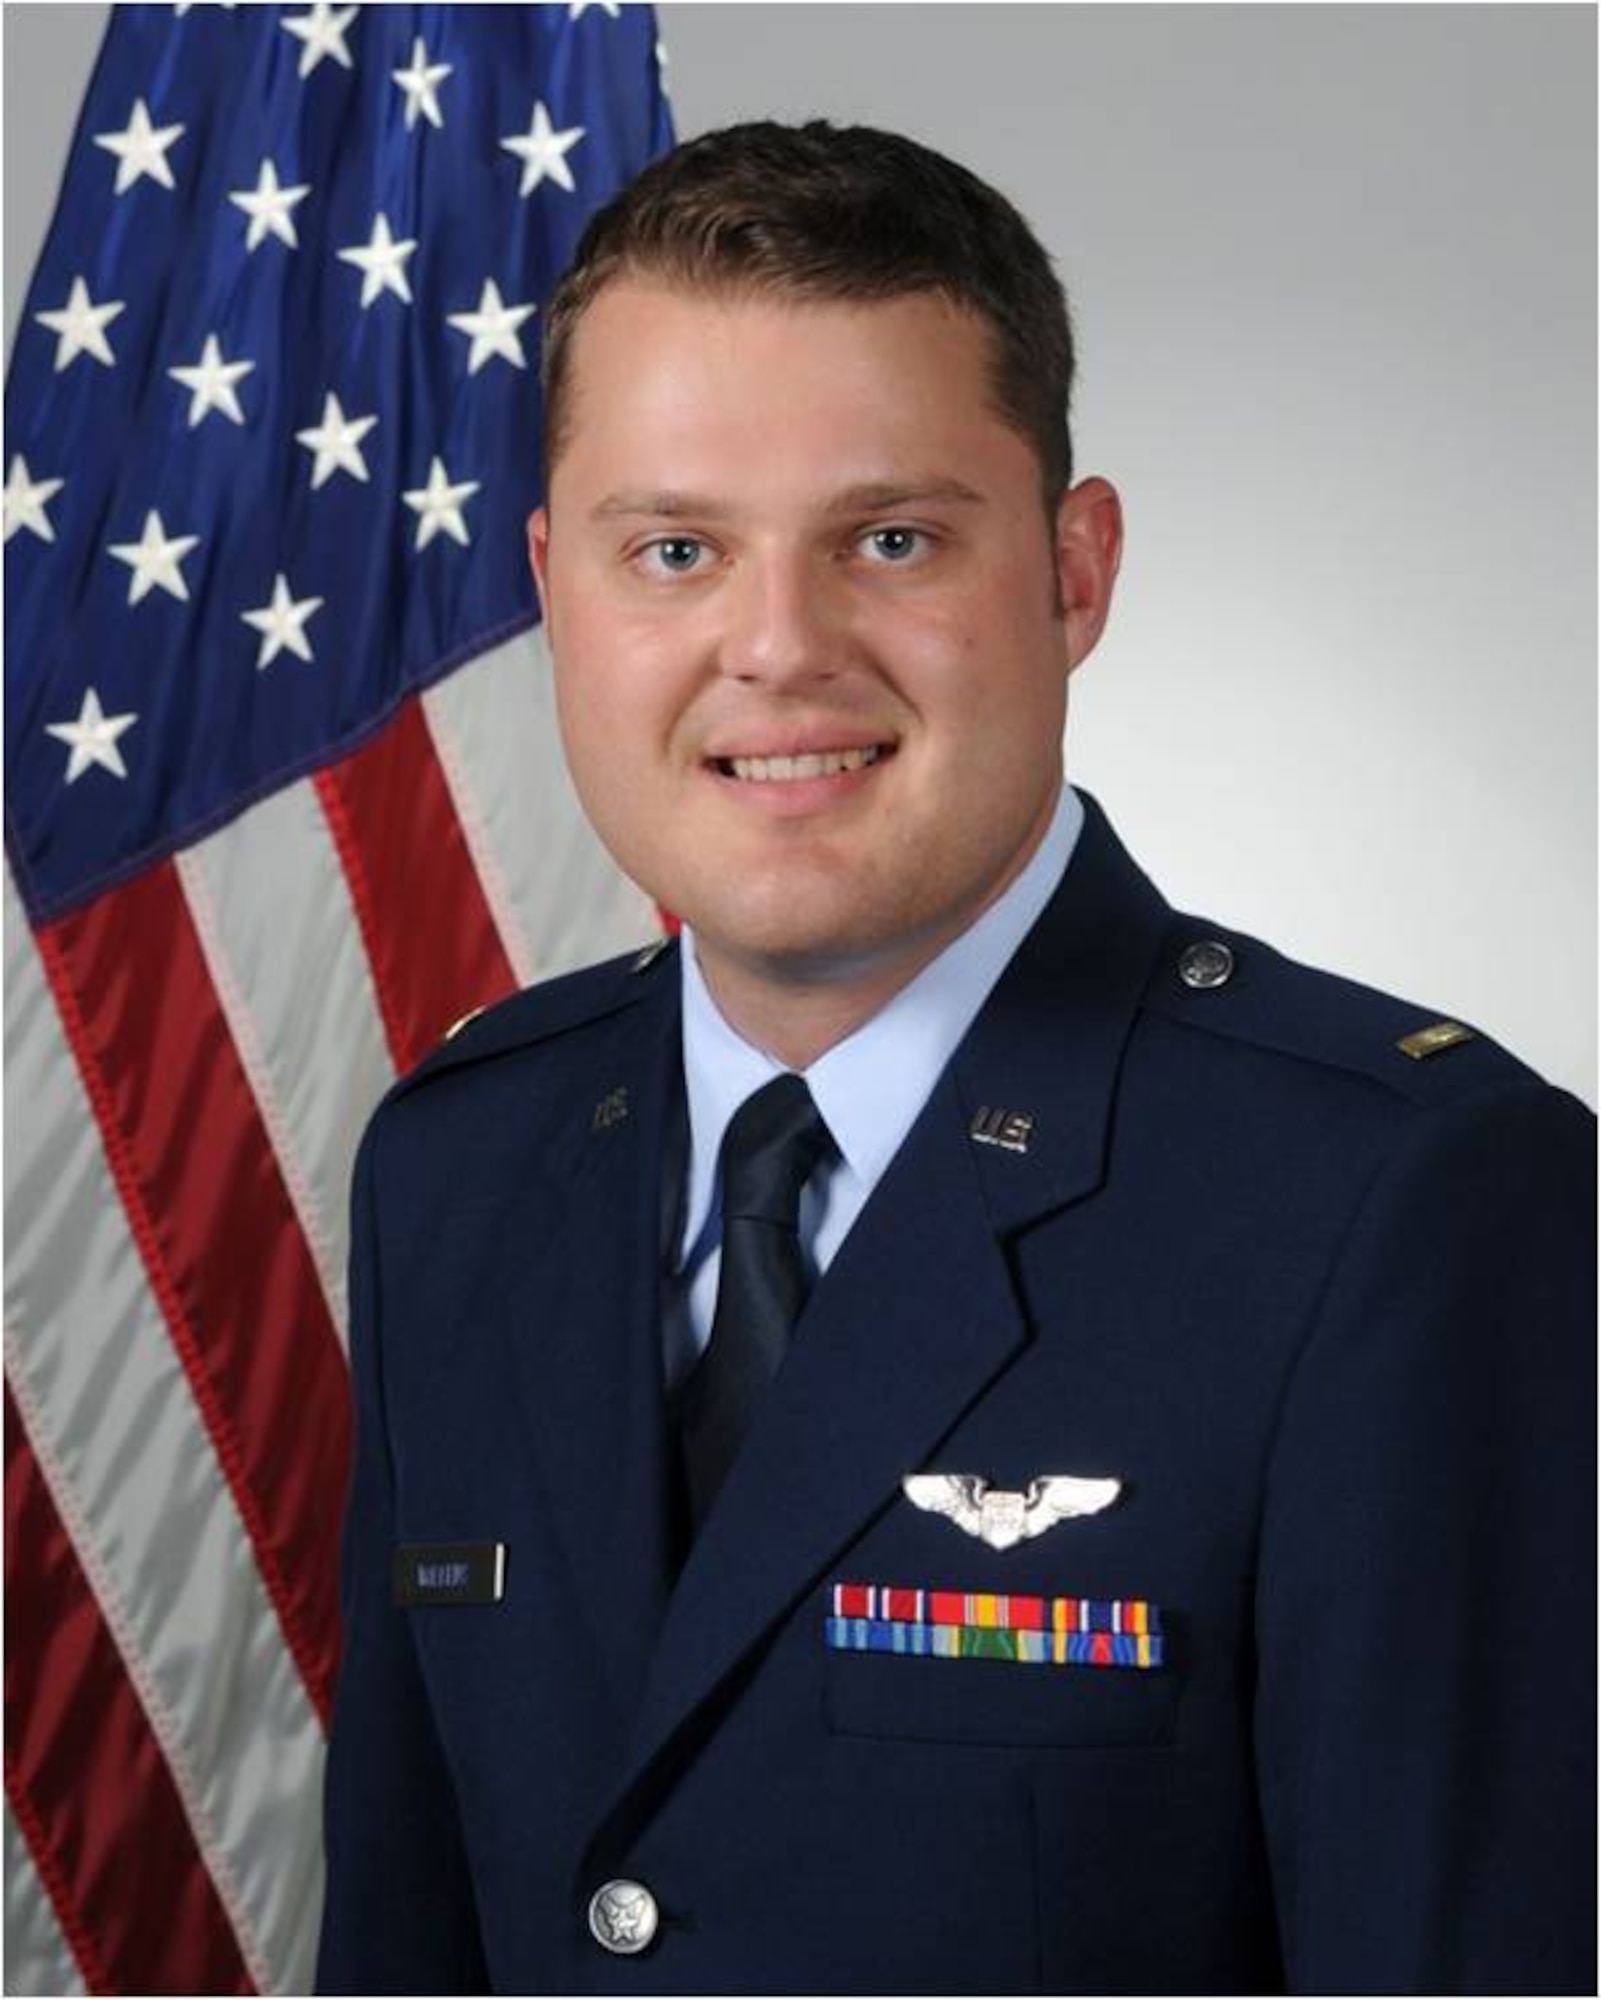 1st Lt. Justin J. Wilkens, 26, was a combat systems officer on his third deployment. He entered the Air Force in 2009, receiving his commission through the Air Force Academy. He had been assigned to the 34th Special Operations Squadron at Hurlburt Field since April 2011 and had more than 400 combat hours. Wilkens died Feb. 18 when his U-28A was involved in an accident near Camp Lemonnier, Djibouti, located in the Horn of Africa. (Courtesy photo)